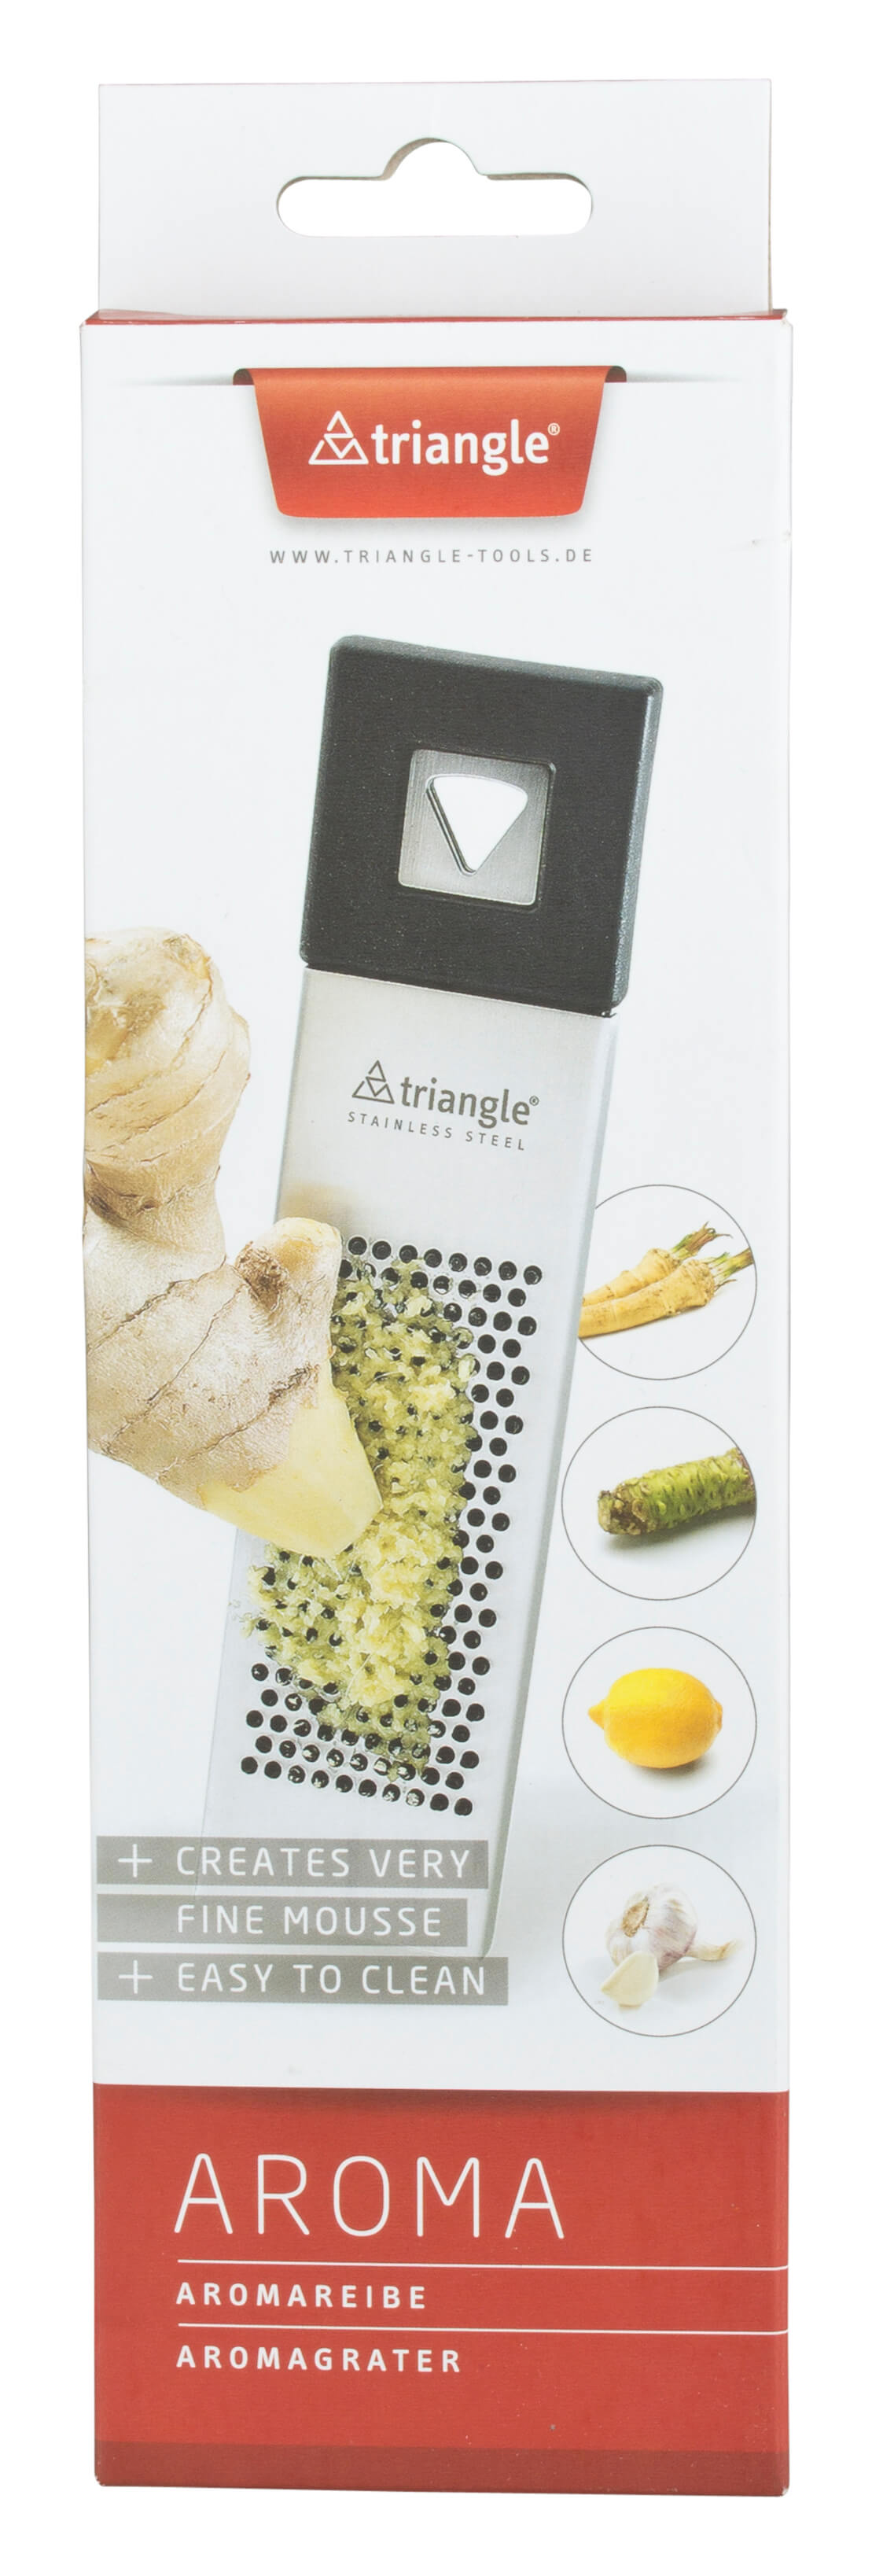 Aroma Grater, Triangle - stainless steel, plastic